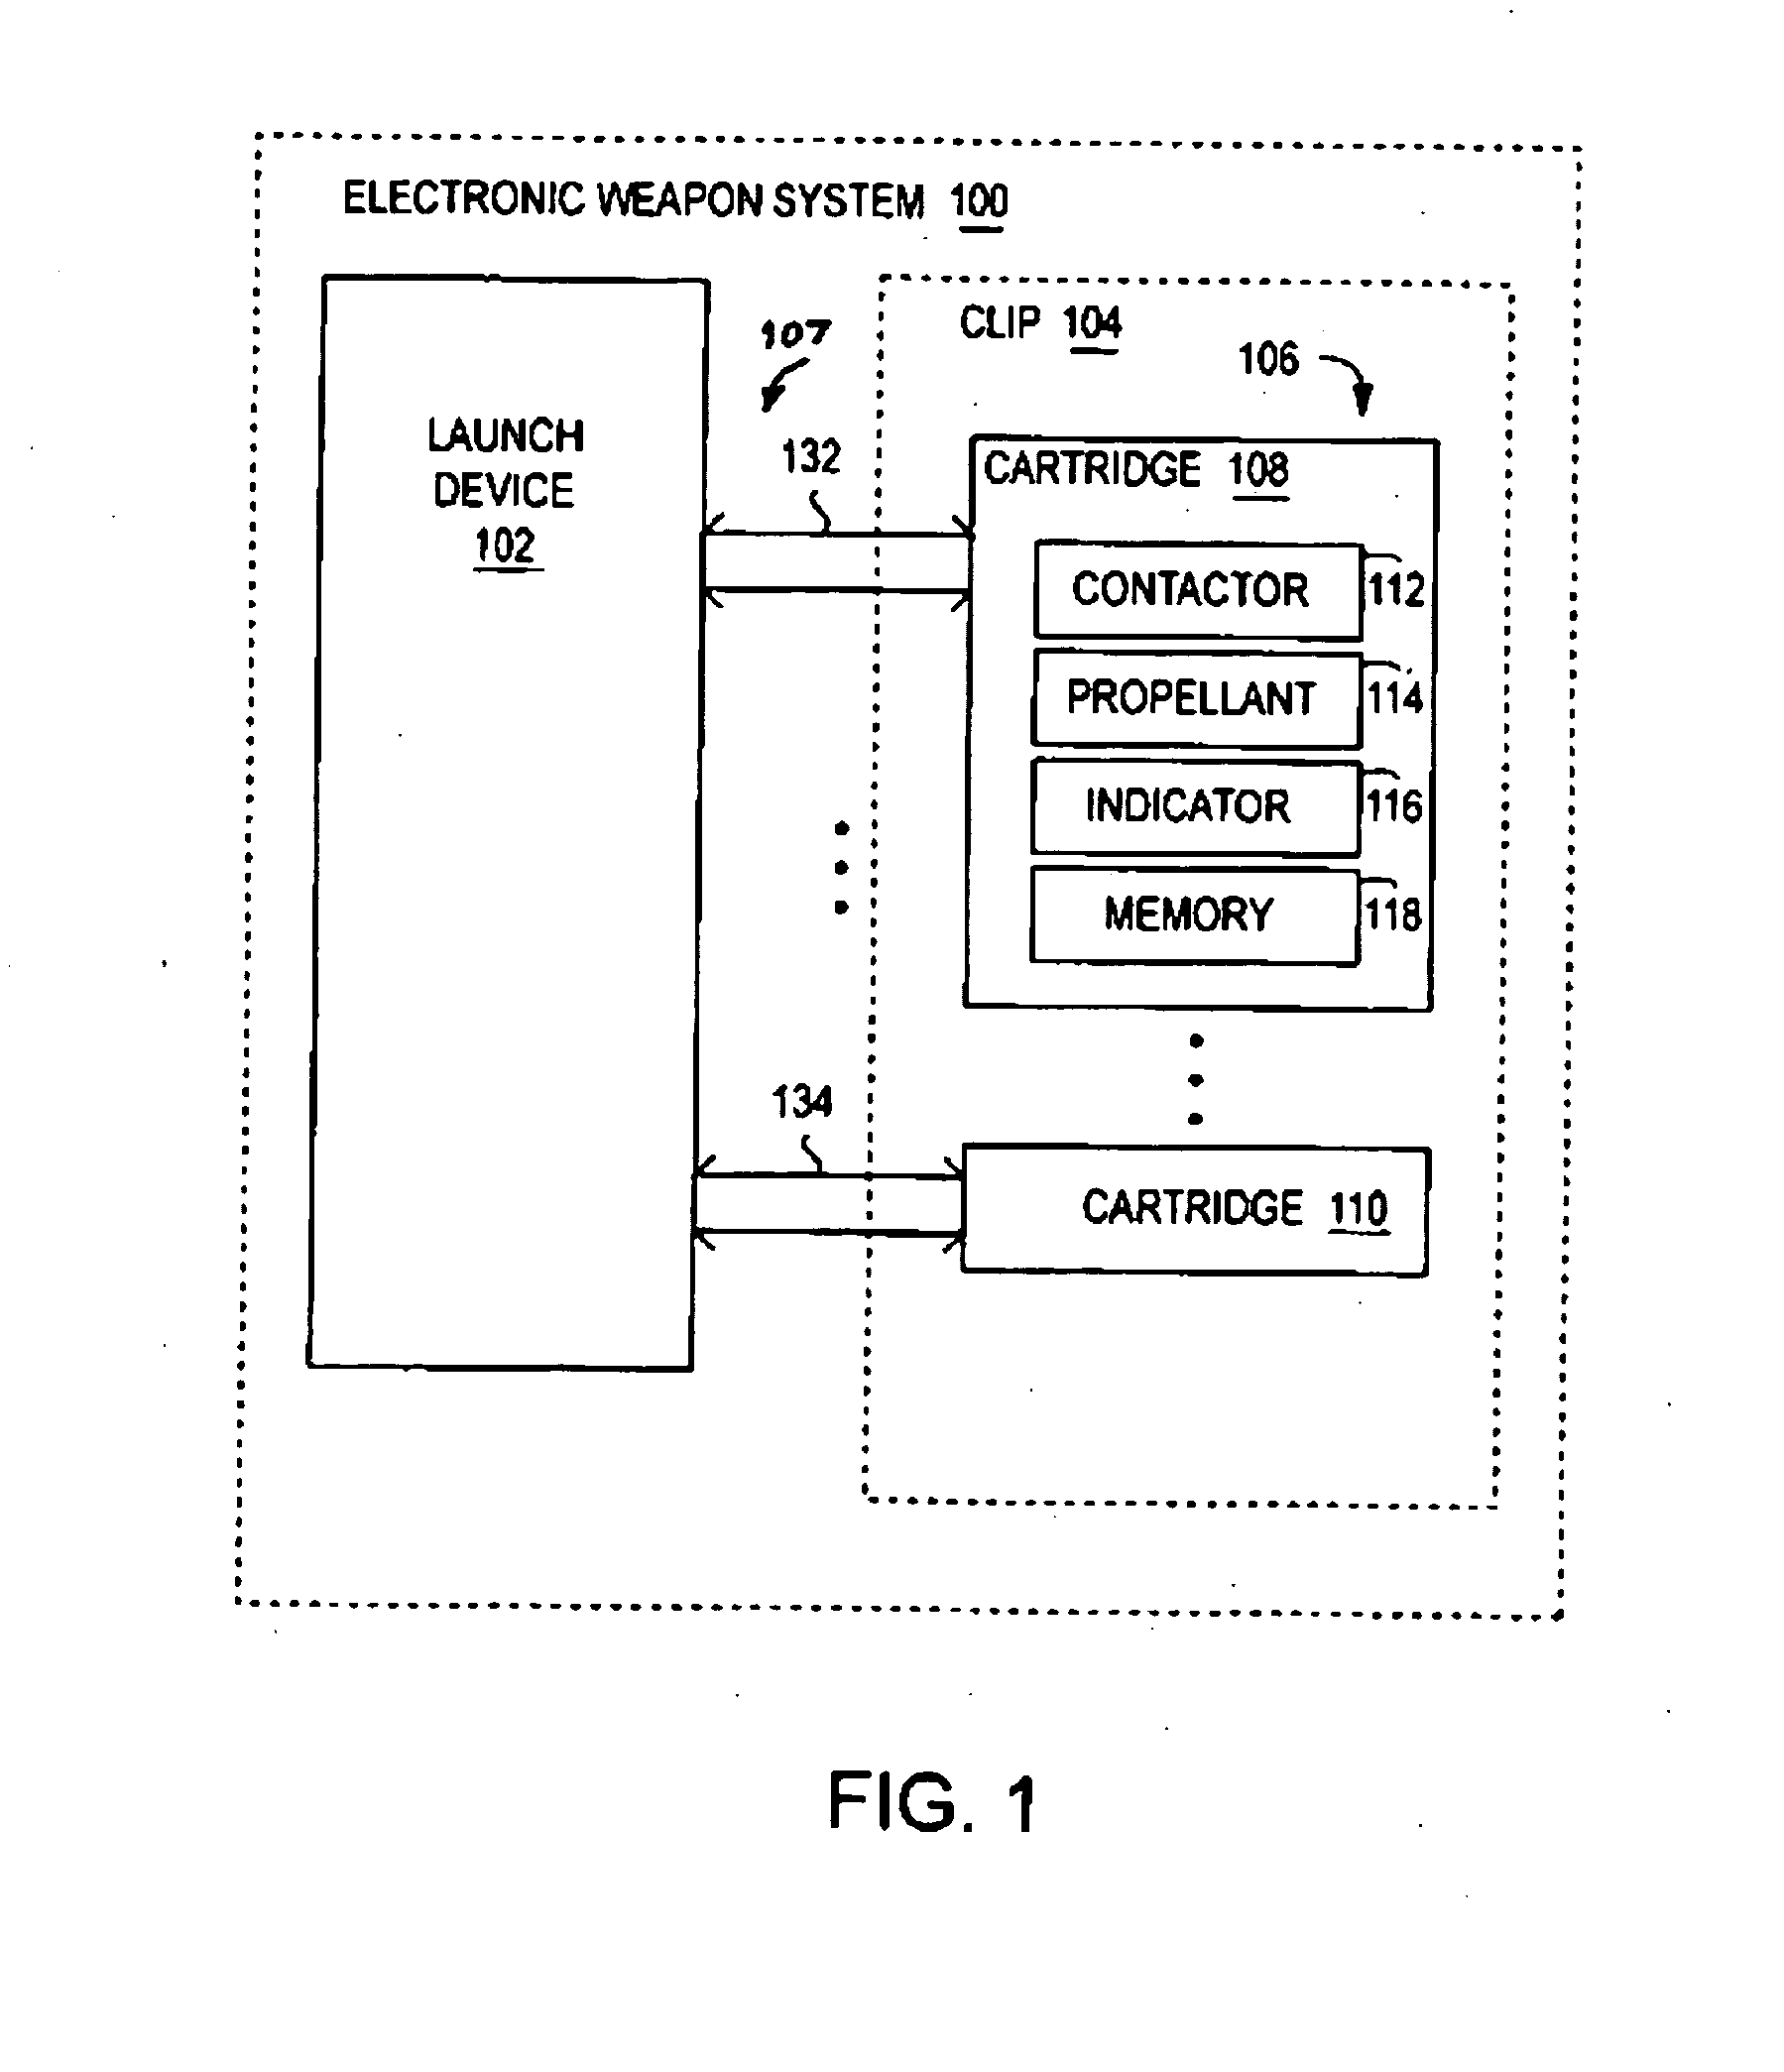 Systems and methods for describing a deployment unit for an electronic